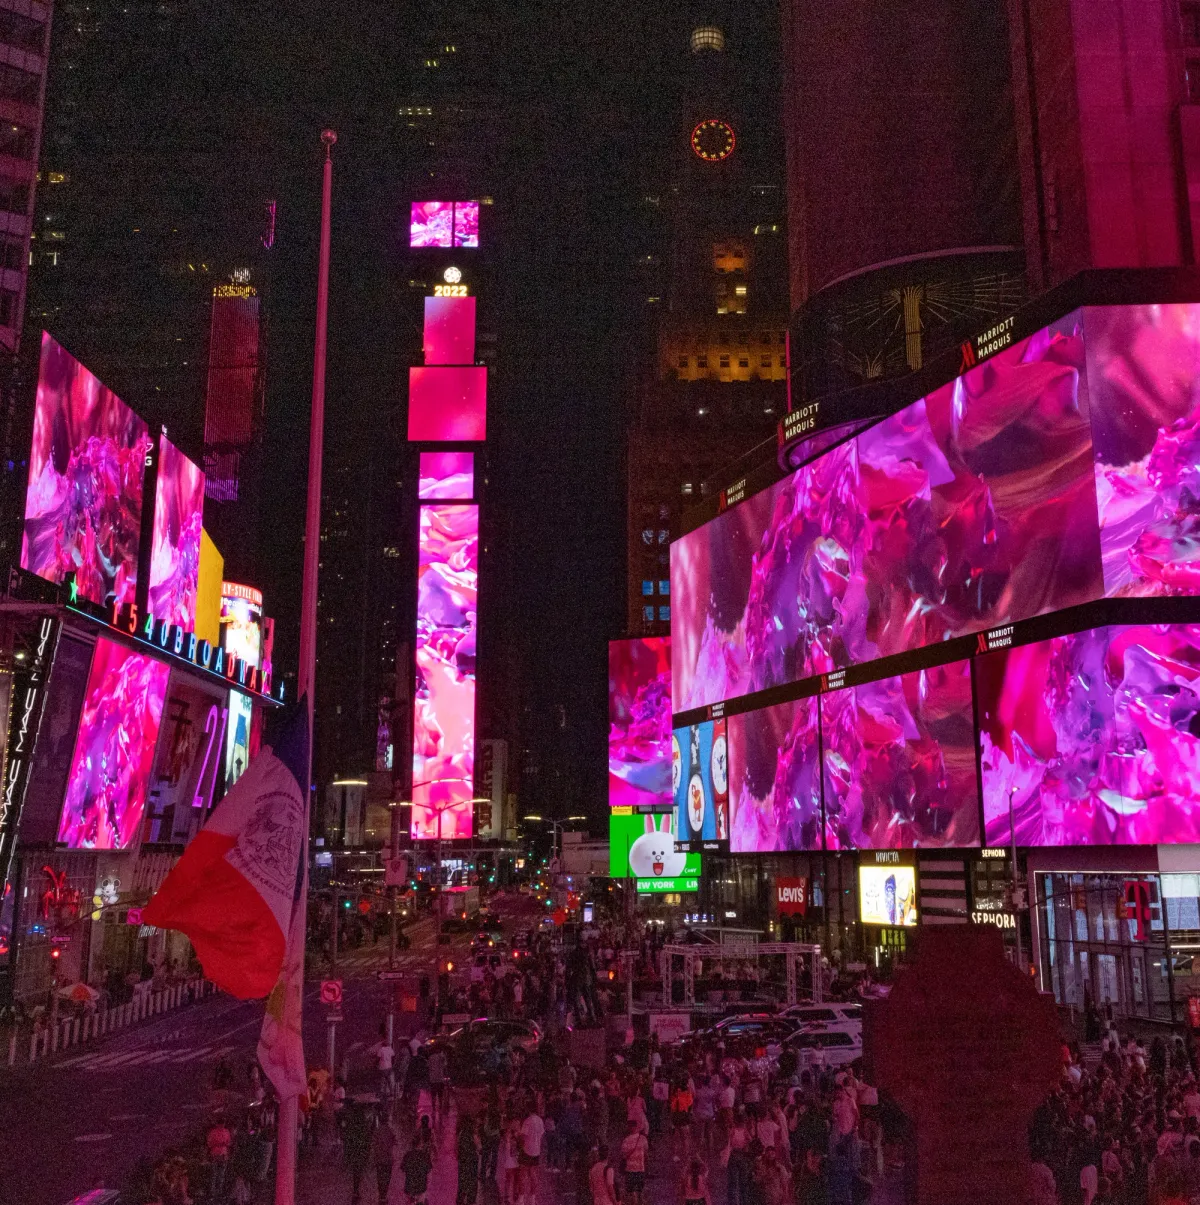 An abstract piece of pink arts is displayed on the advertisement screens of Times Square, surrounded by towering buildings. The vibrant artwork provides a stark contrast to the urban surroundings.